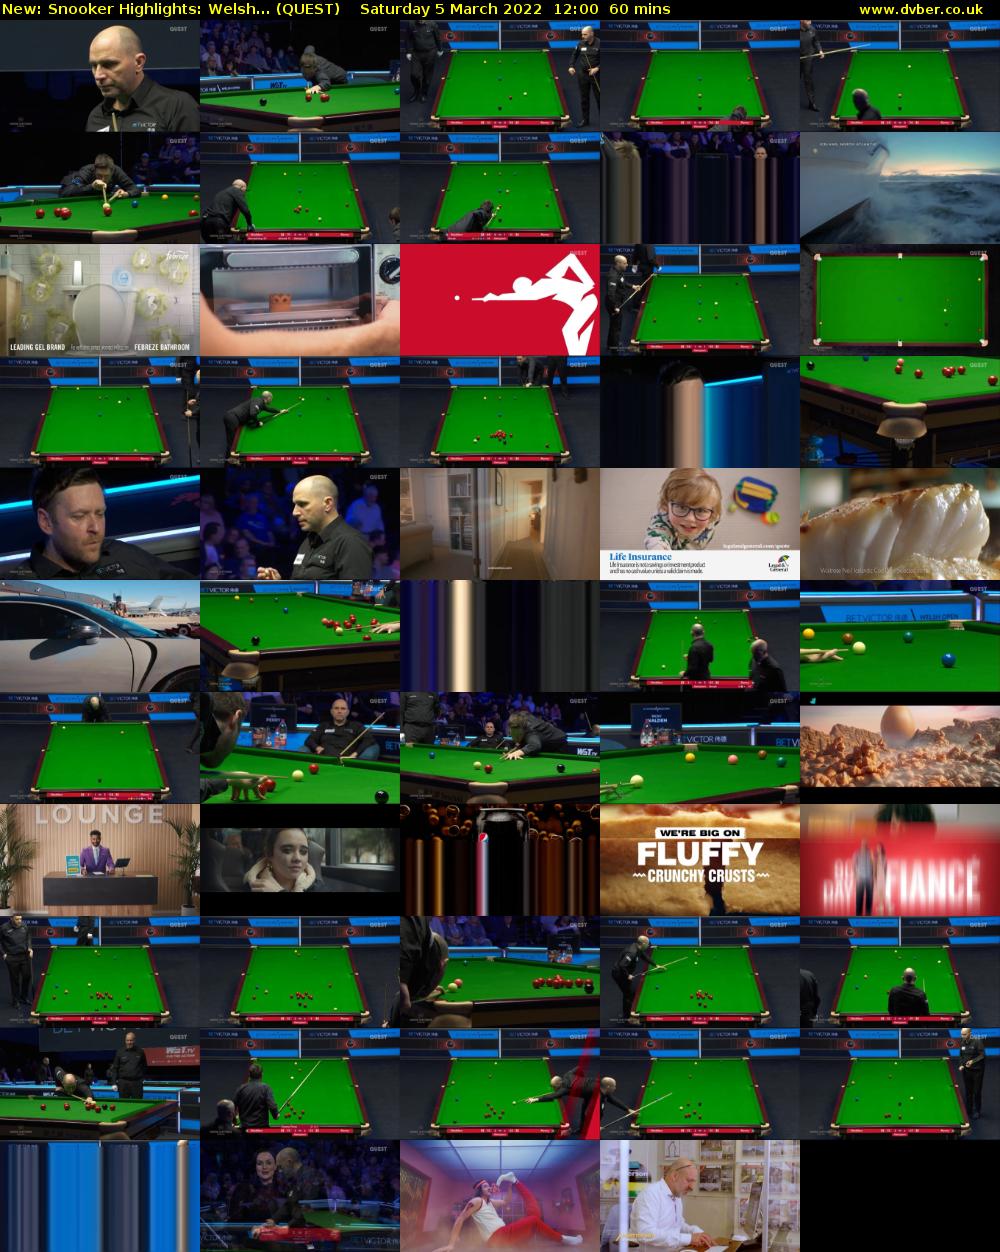 Snooker Highlights: Welsh... (QUEST) Saturday 5 March 2022 12:00 - 13:00